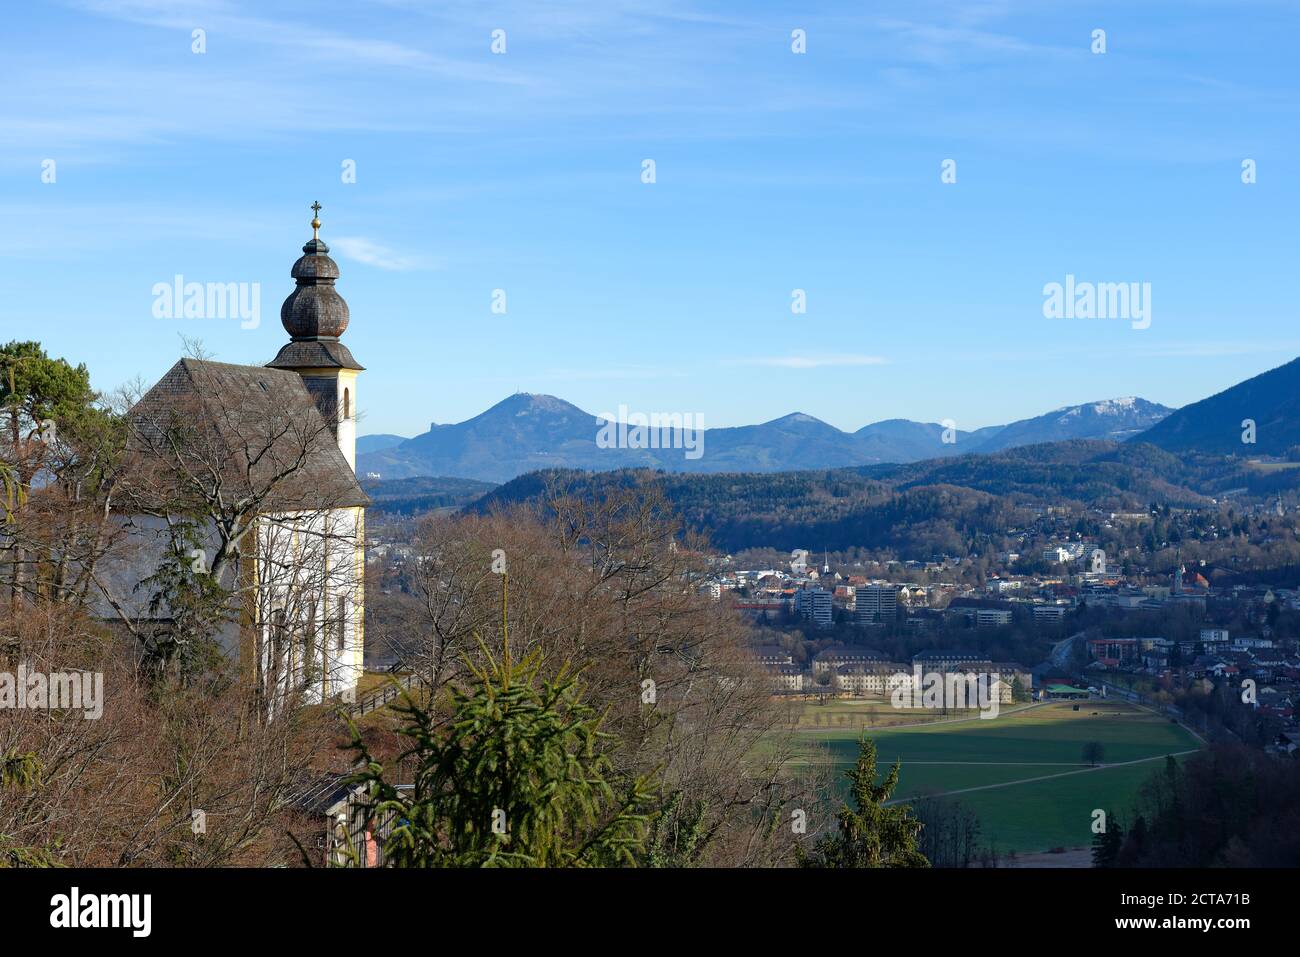 Germany, Upper Bavaria, Church Saint Pankratius above the valley of  Bad Reichenhall in front of the Gaisberg Stock Photo